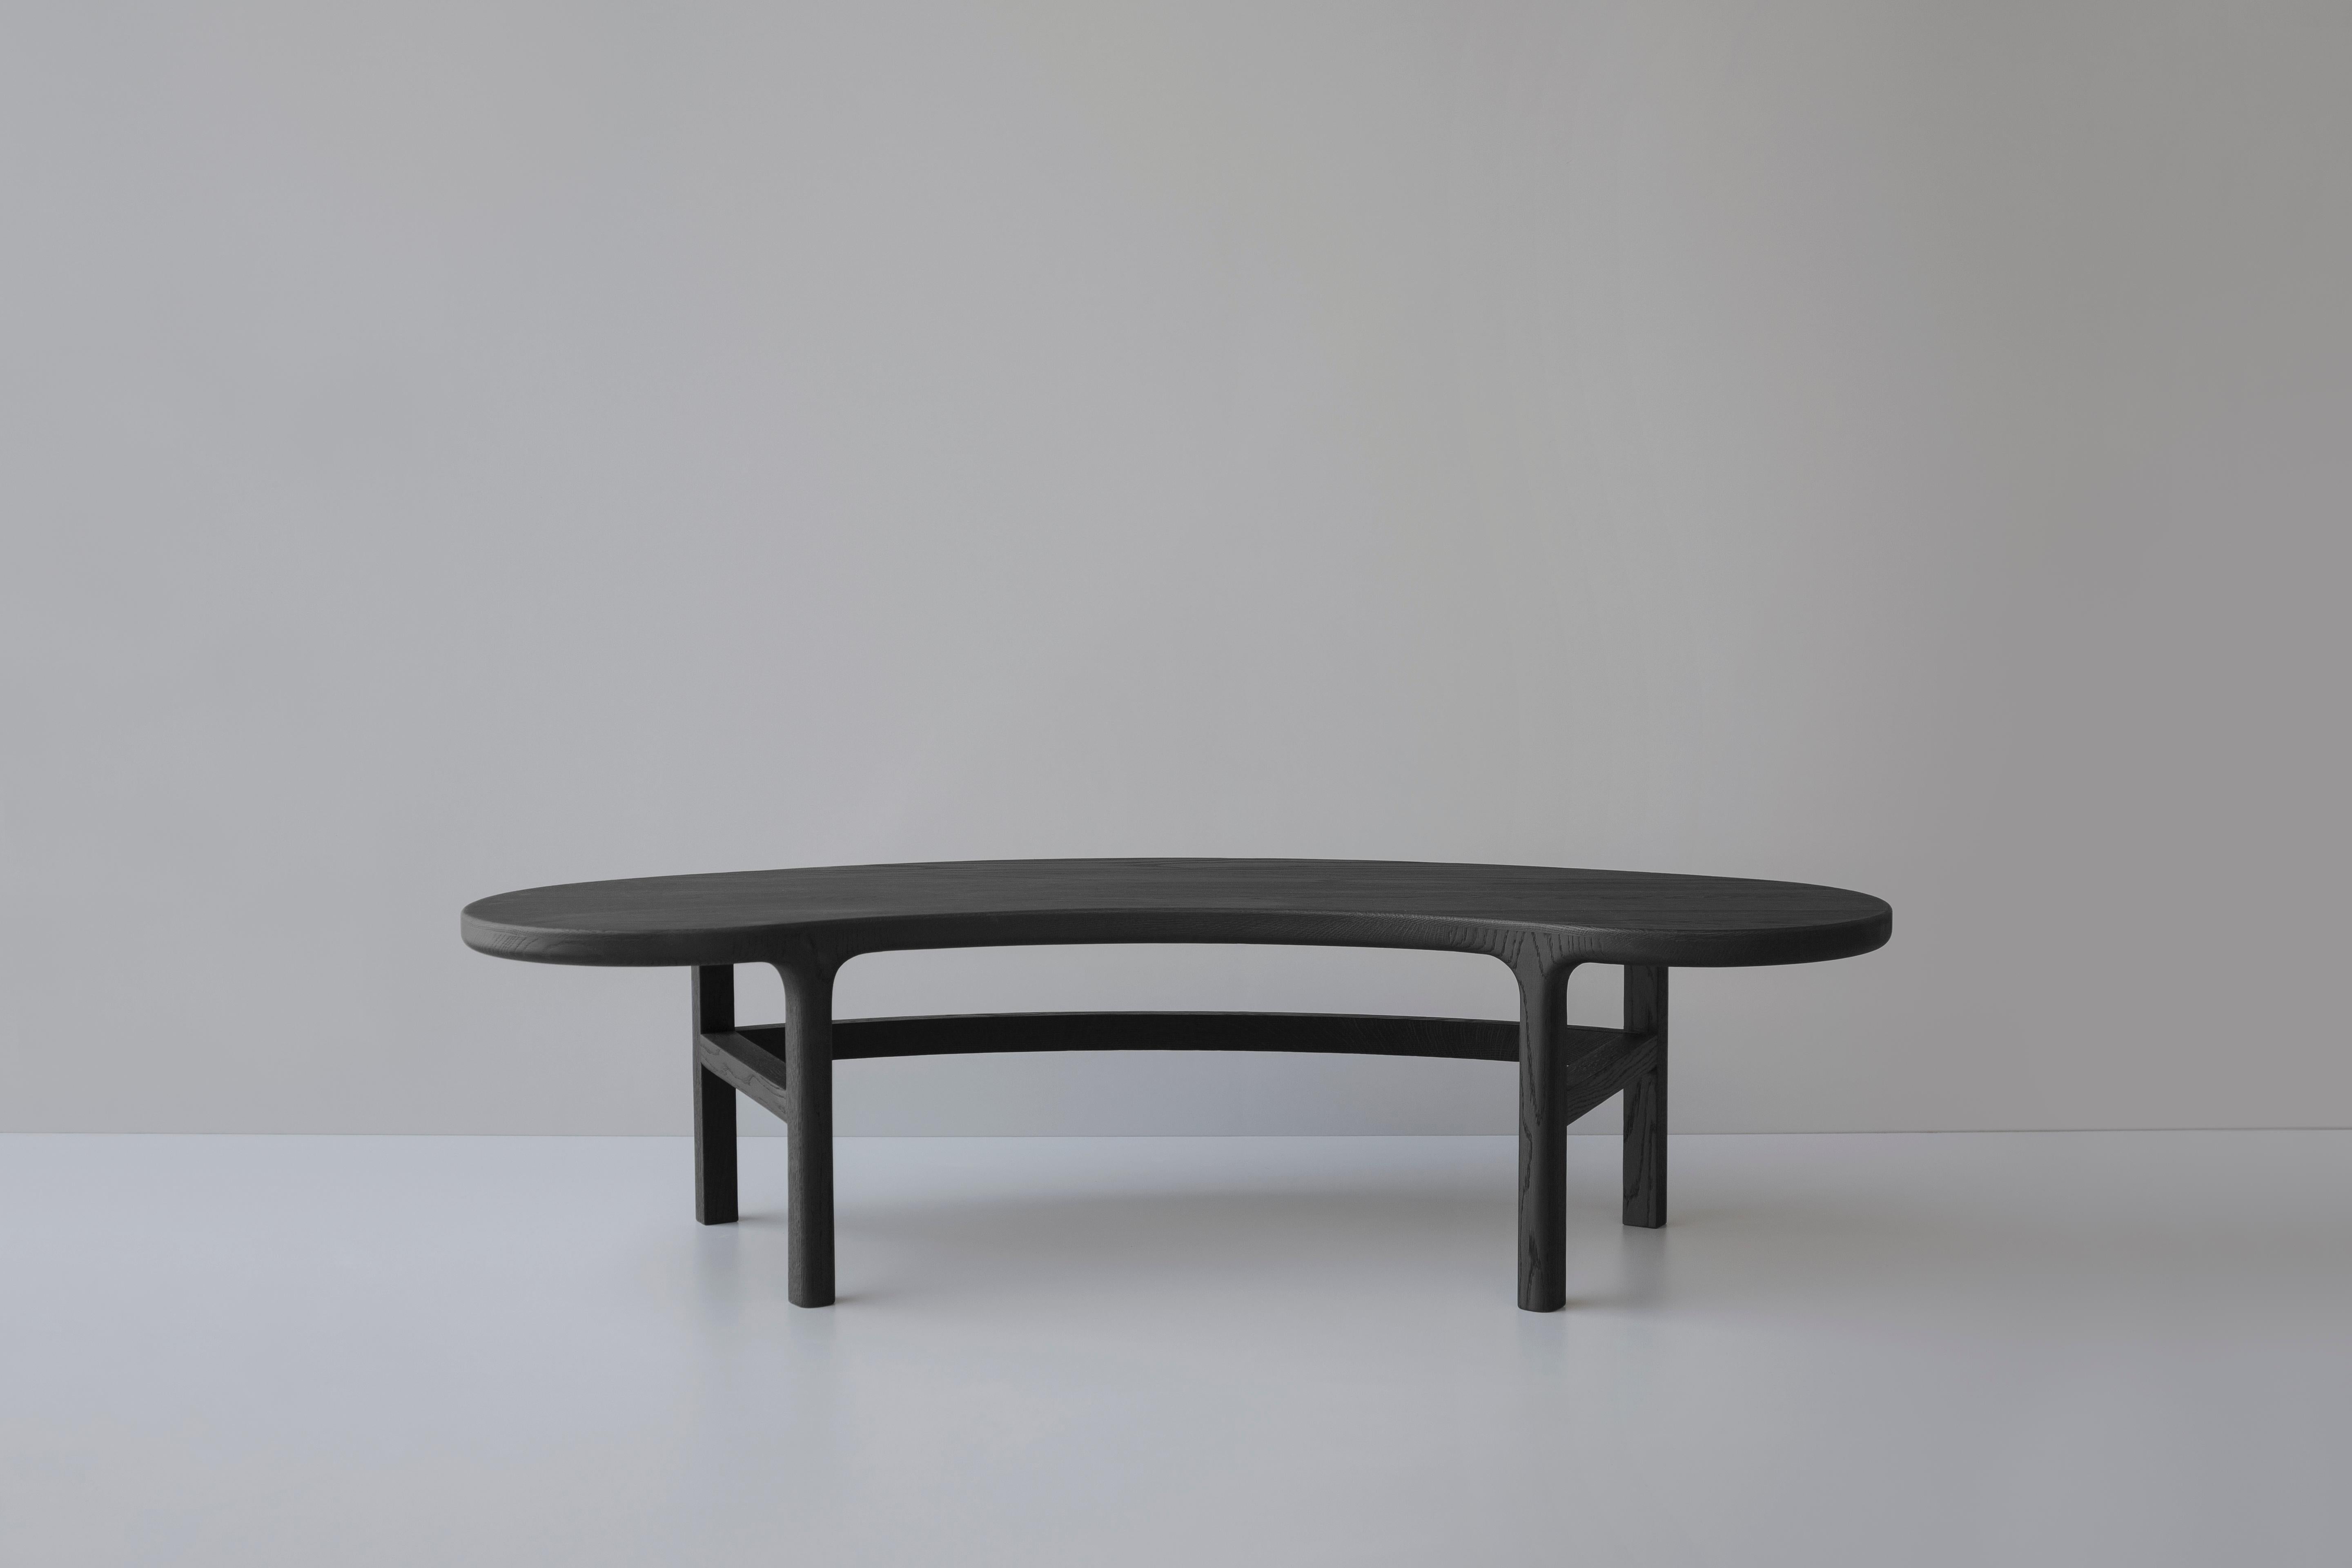 Large Trasiego coffee table by Arturo Verástegui
Dimensions: D 150 x W 66 x H 42 cm
Materials: oak wood.

White oak with burnt finish table.

Sebastián Angeles is an Industrial Designer originally from Mexico City who graduated from the